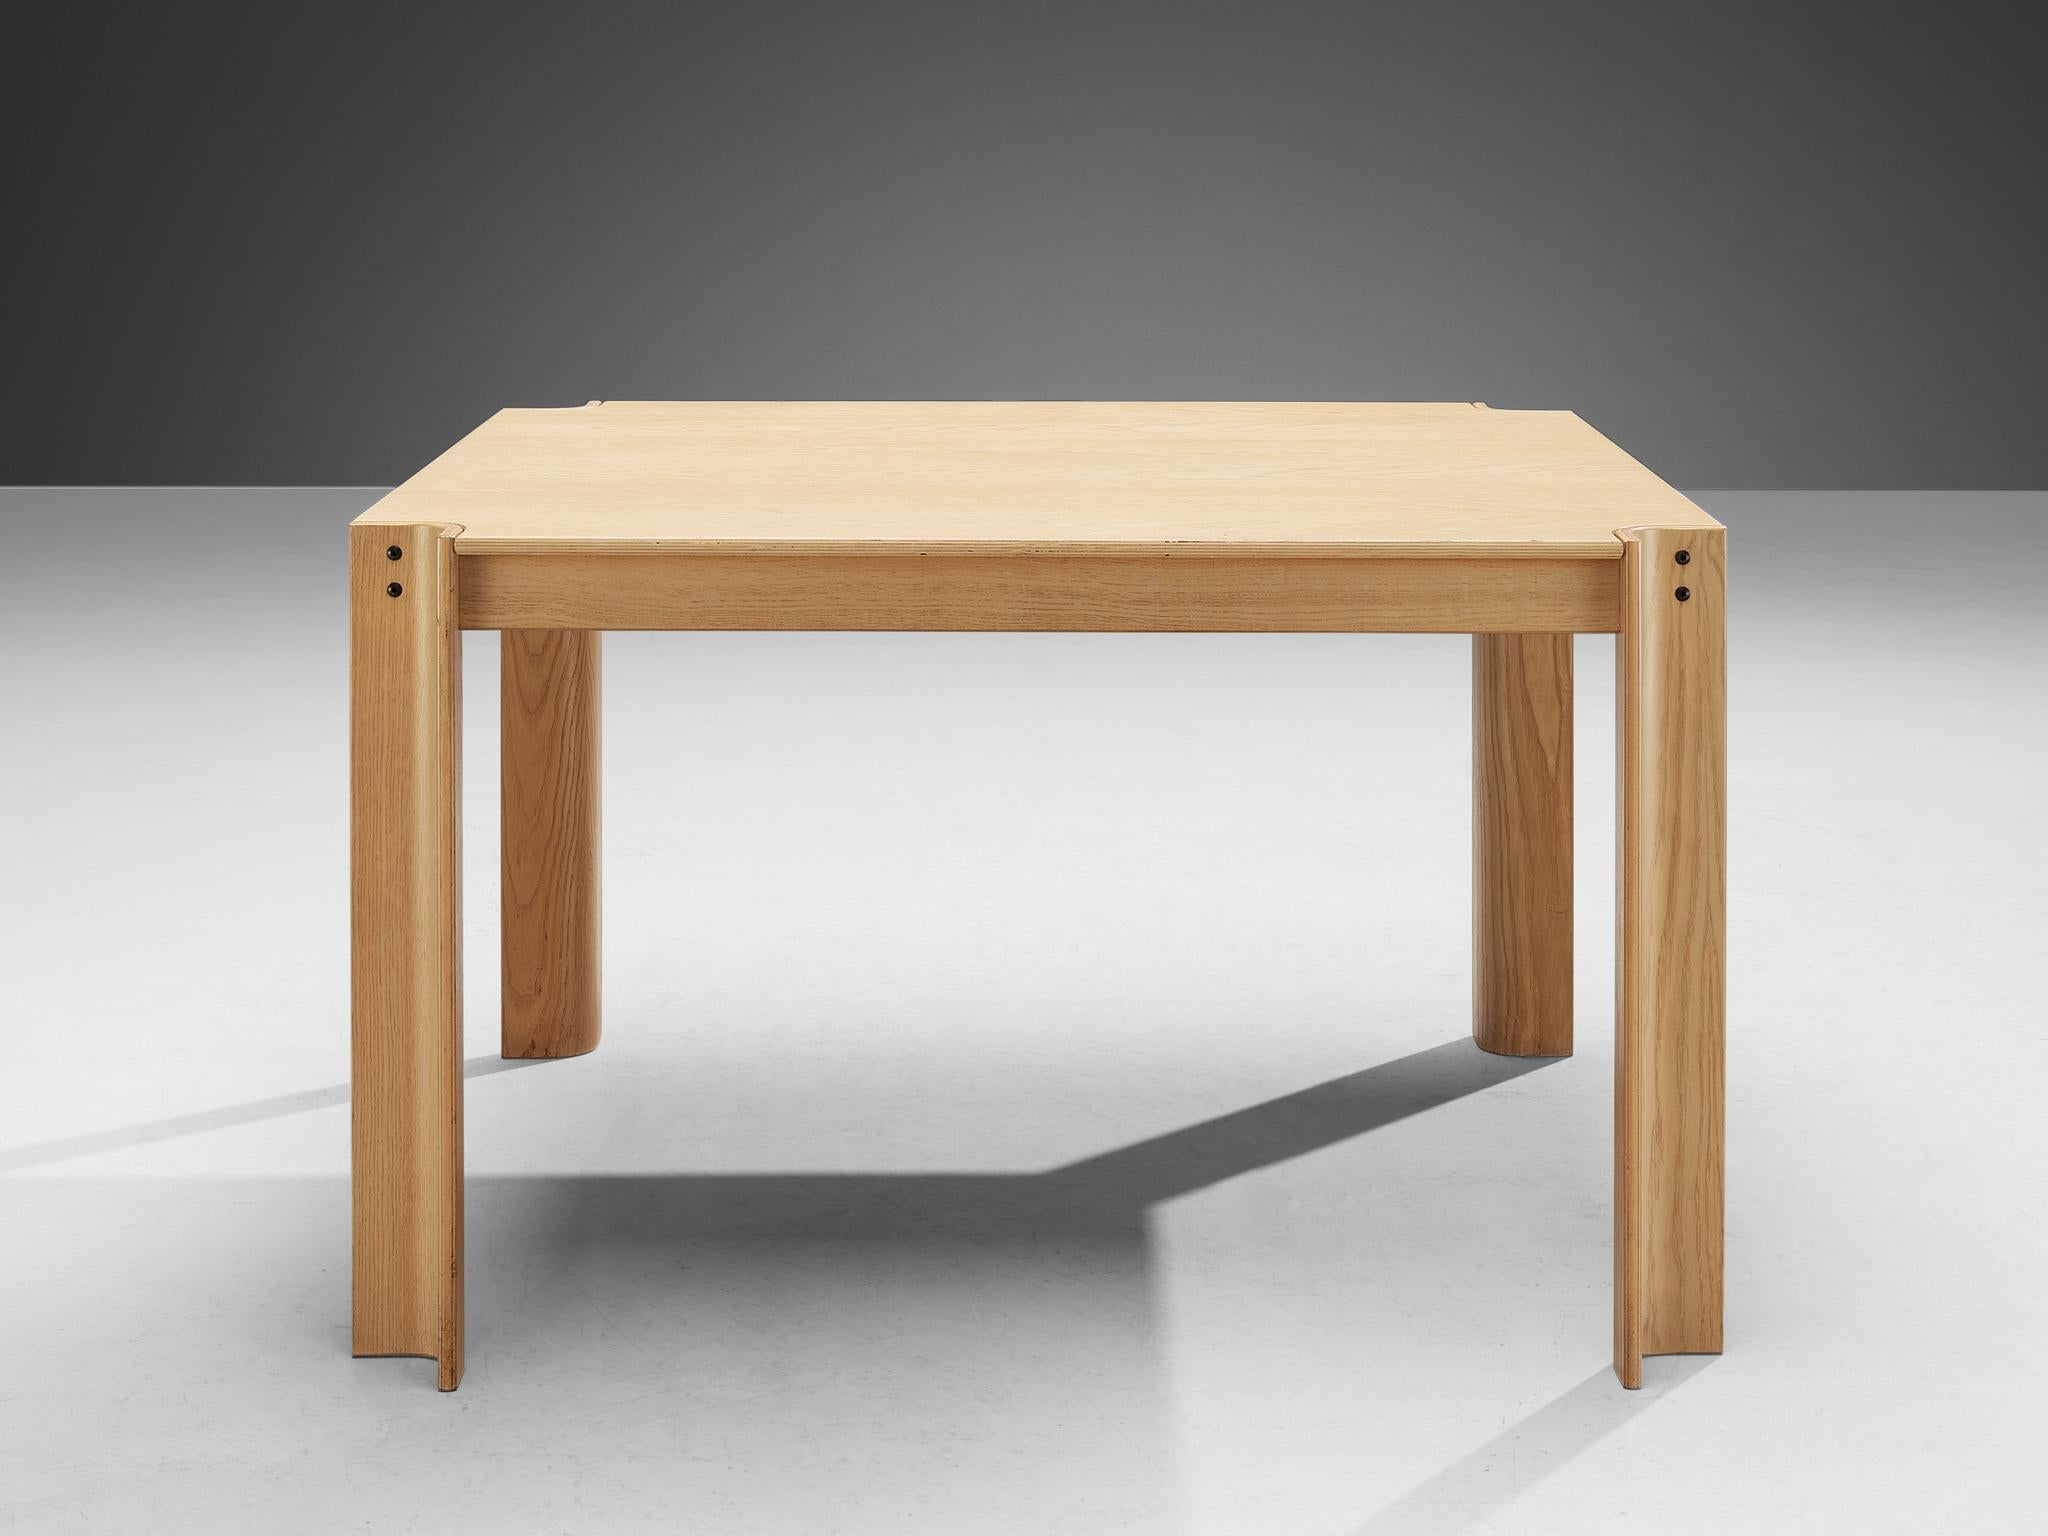 Gijs Bakker for Castelijn, 'Strip' dining table, oak, The Netherlands, design 1974.

This table is designed by the Dutch furniture and jewellery designer Gijs Bakker. The dining table is designed in 1974 and distinguishes itself by means of the